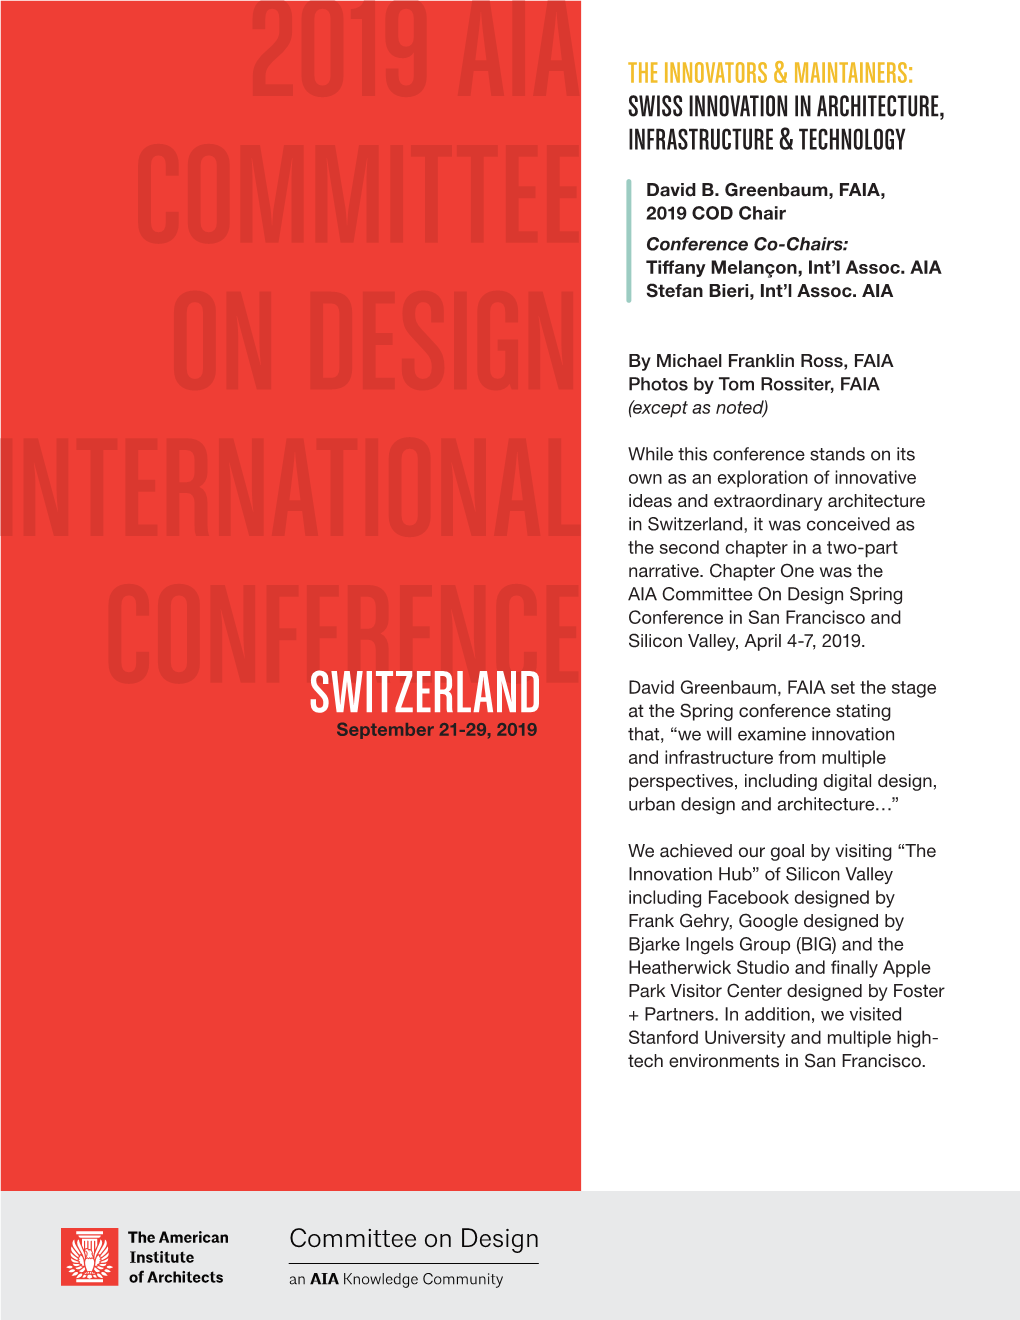 COD Switzerland Conference Summary by Michael Ross.Pdf